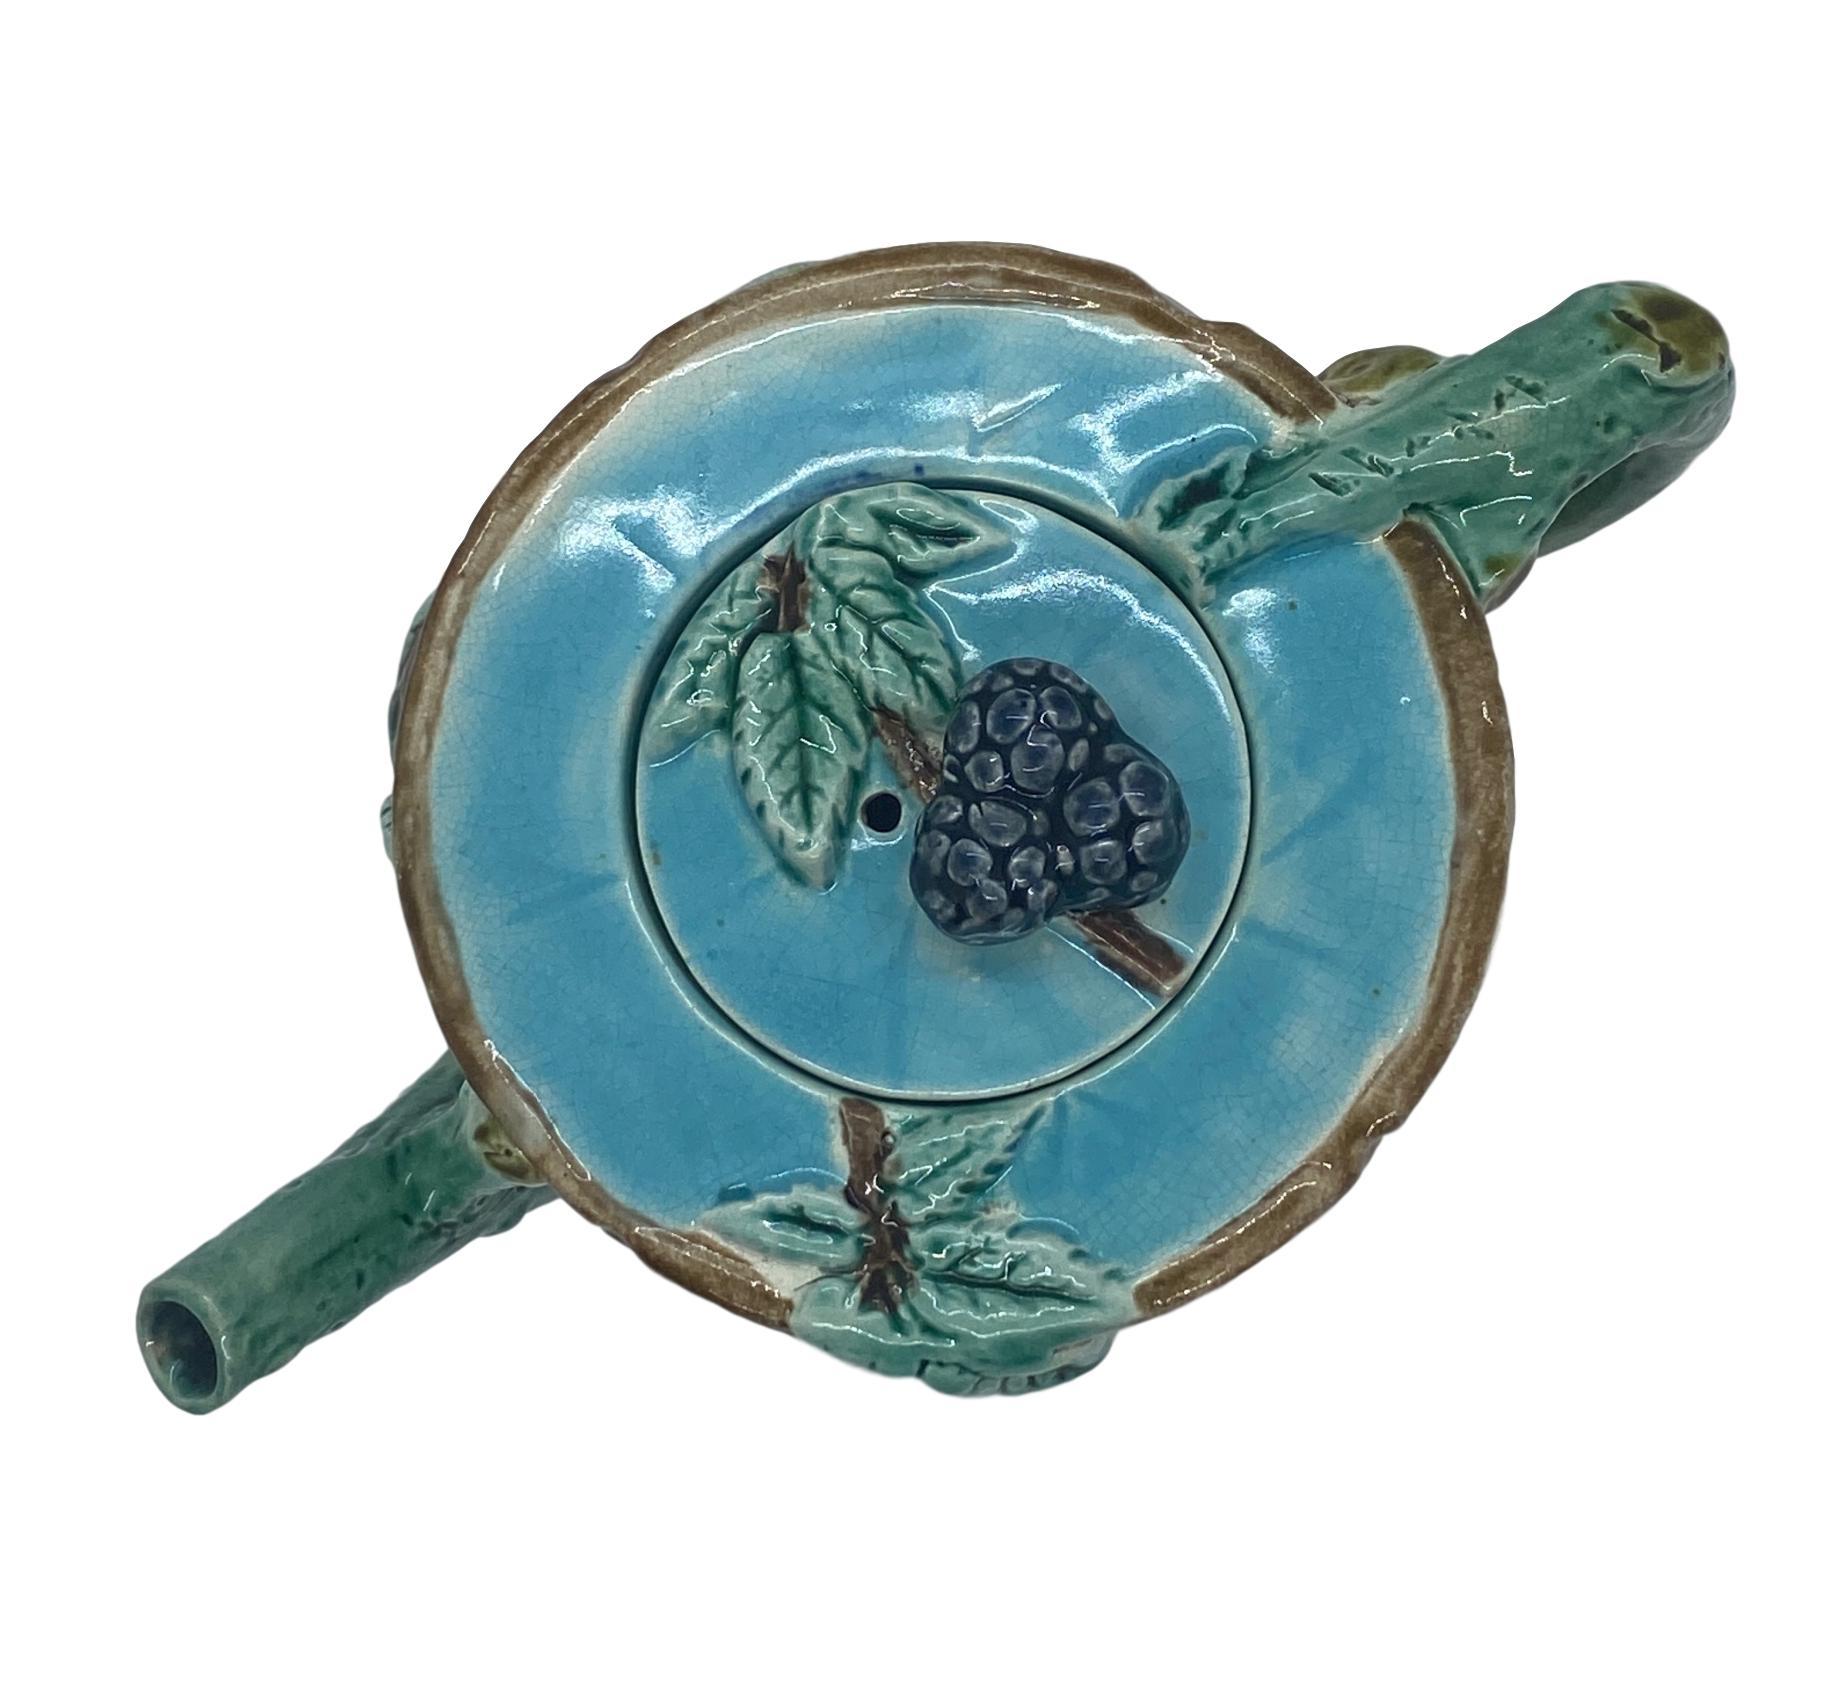 Holdcroft Majolica Blackberry on Tree Trunk Teapot, Turquoise Blue Cover c. 1877 For Sale 2